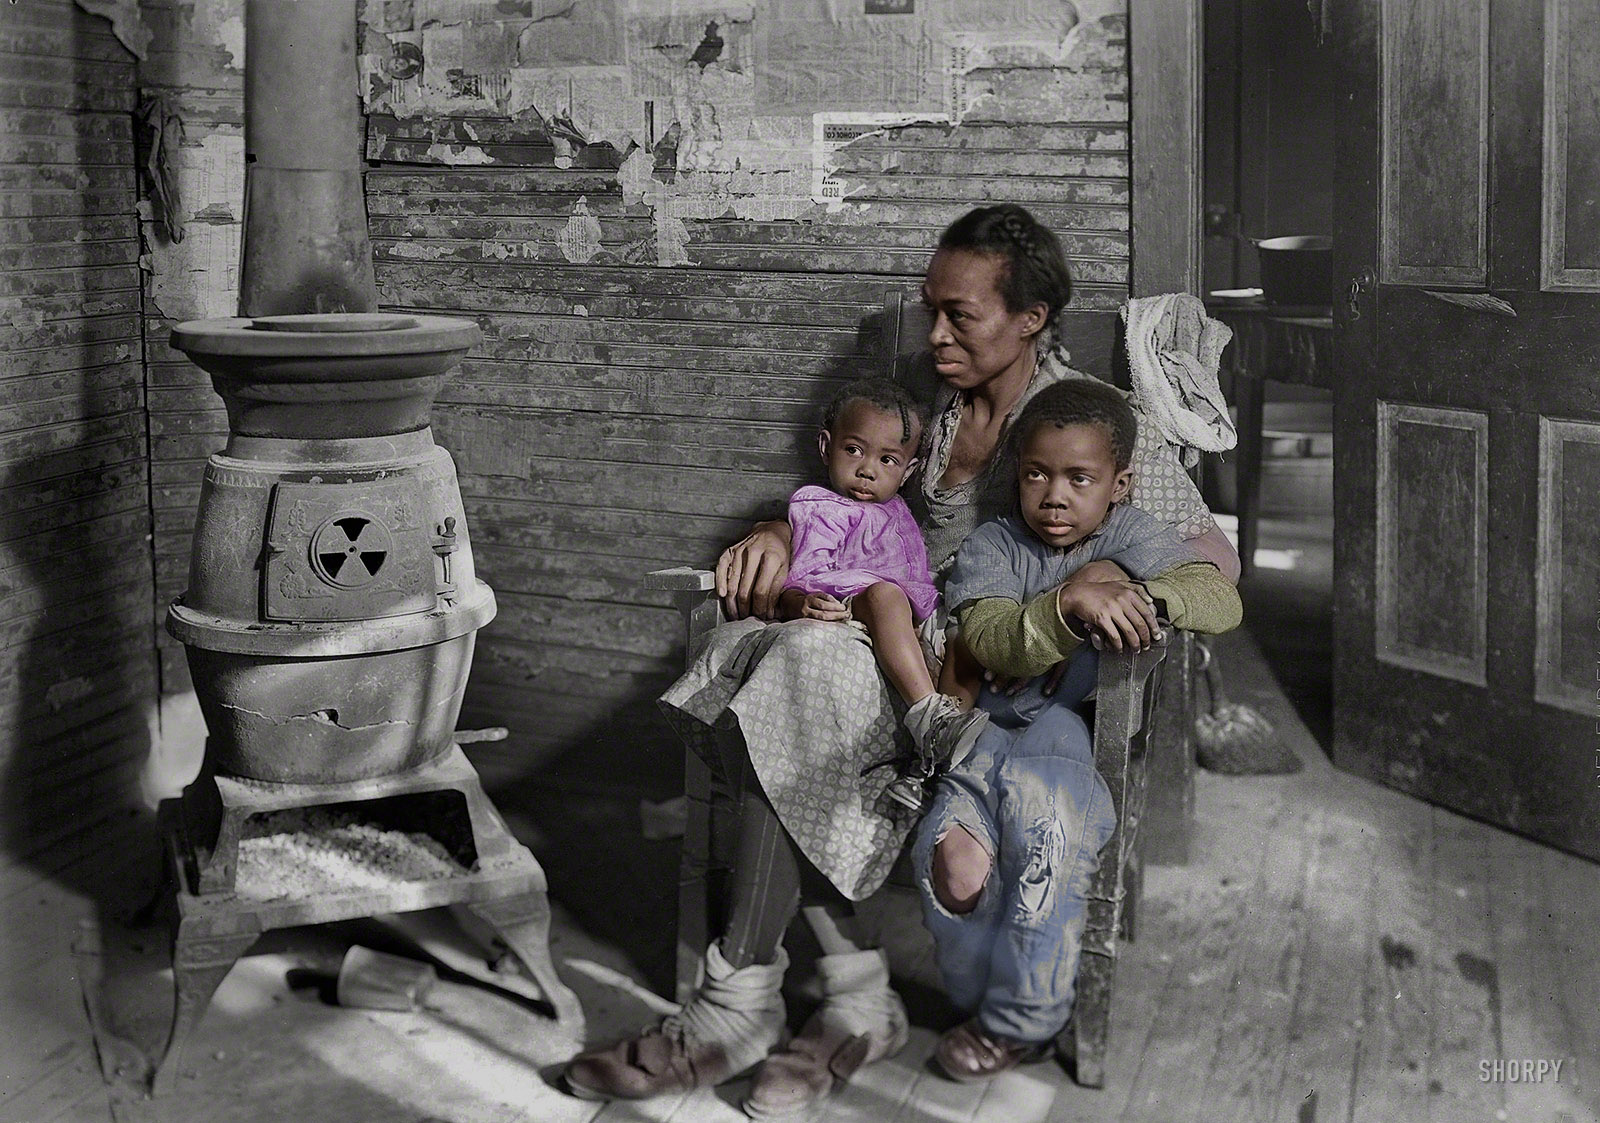 Colorized from this Shorpy original. This is my first attempt at colorizing these amazing black and white photos; I'm hooked. What do you think? View full size.